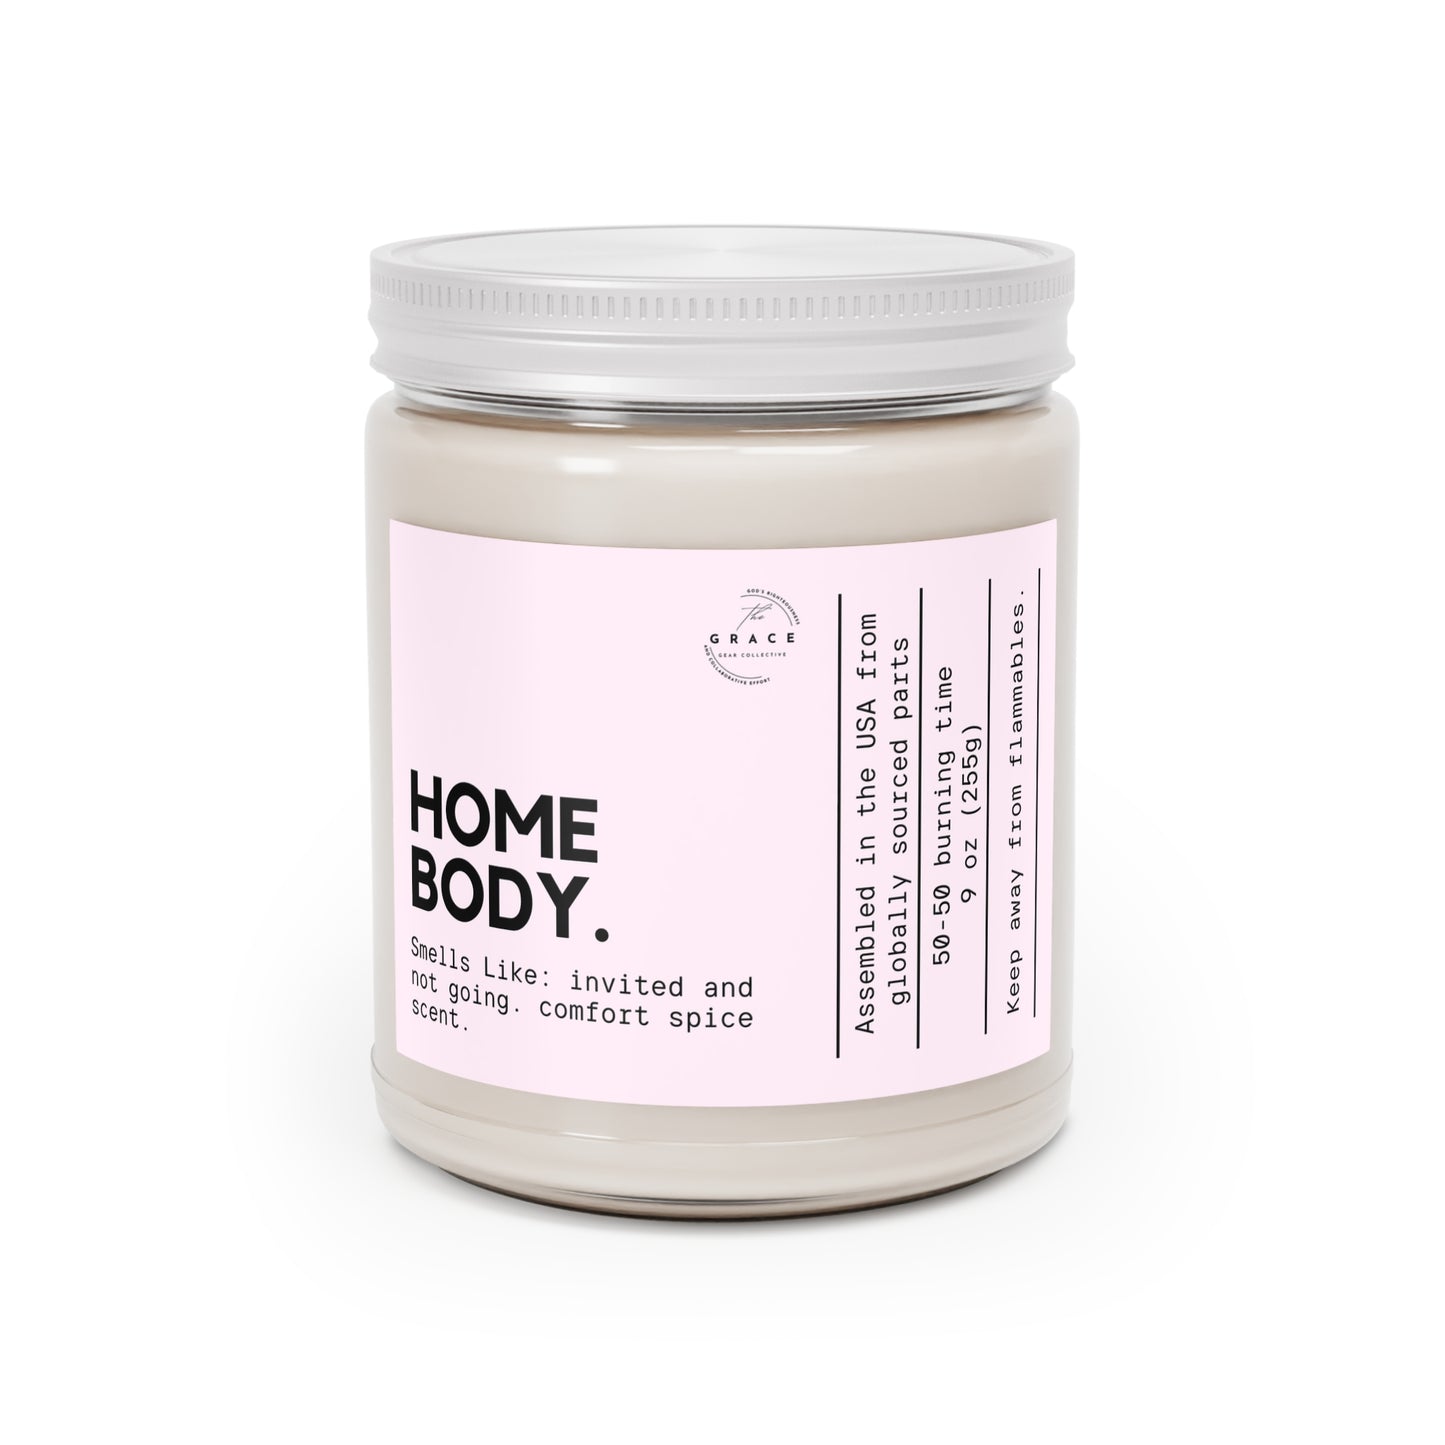 Homebody Scented Candle, 9oz